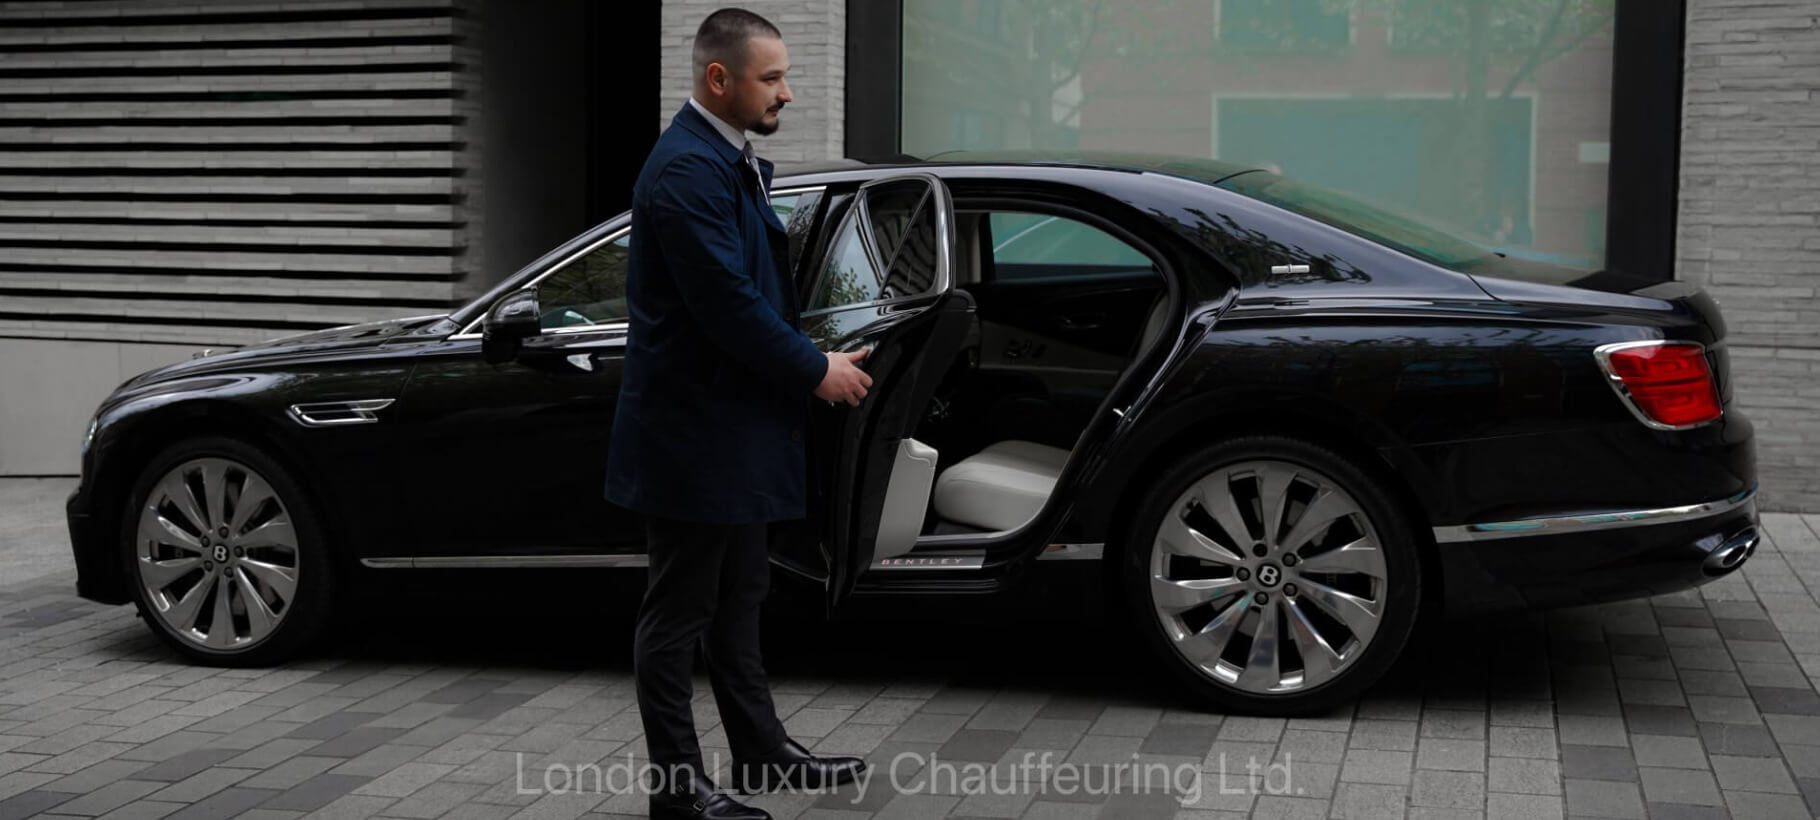 The Ultimate guide to choose the best chauffeur company in London